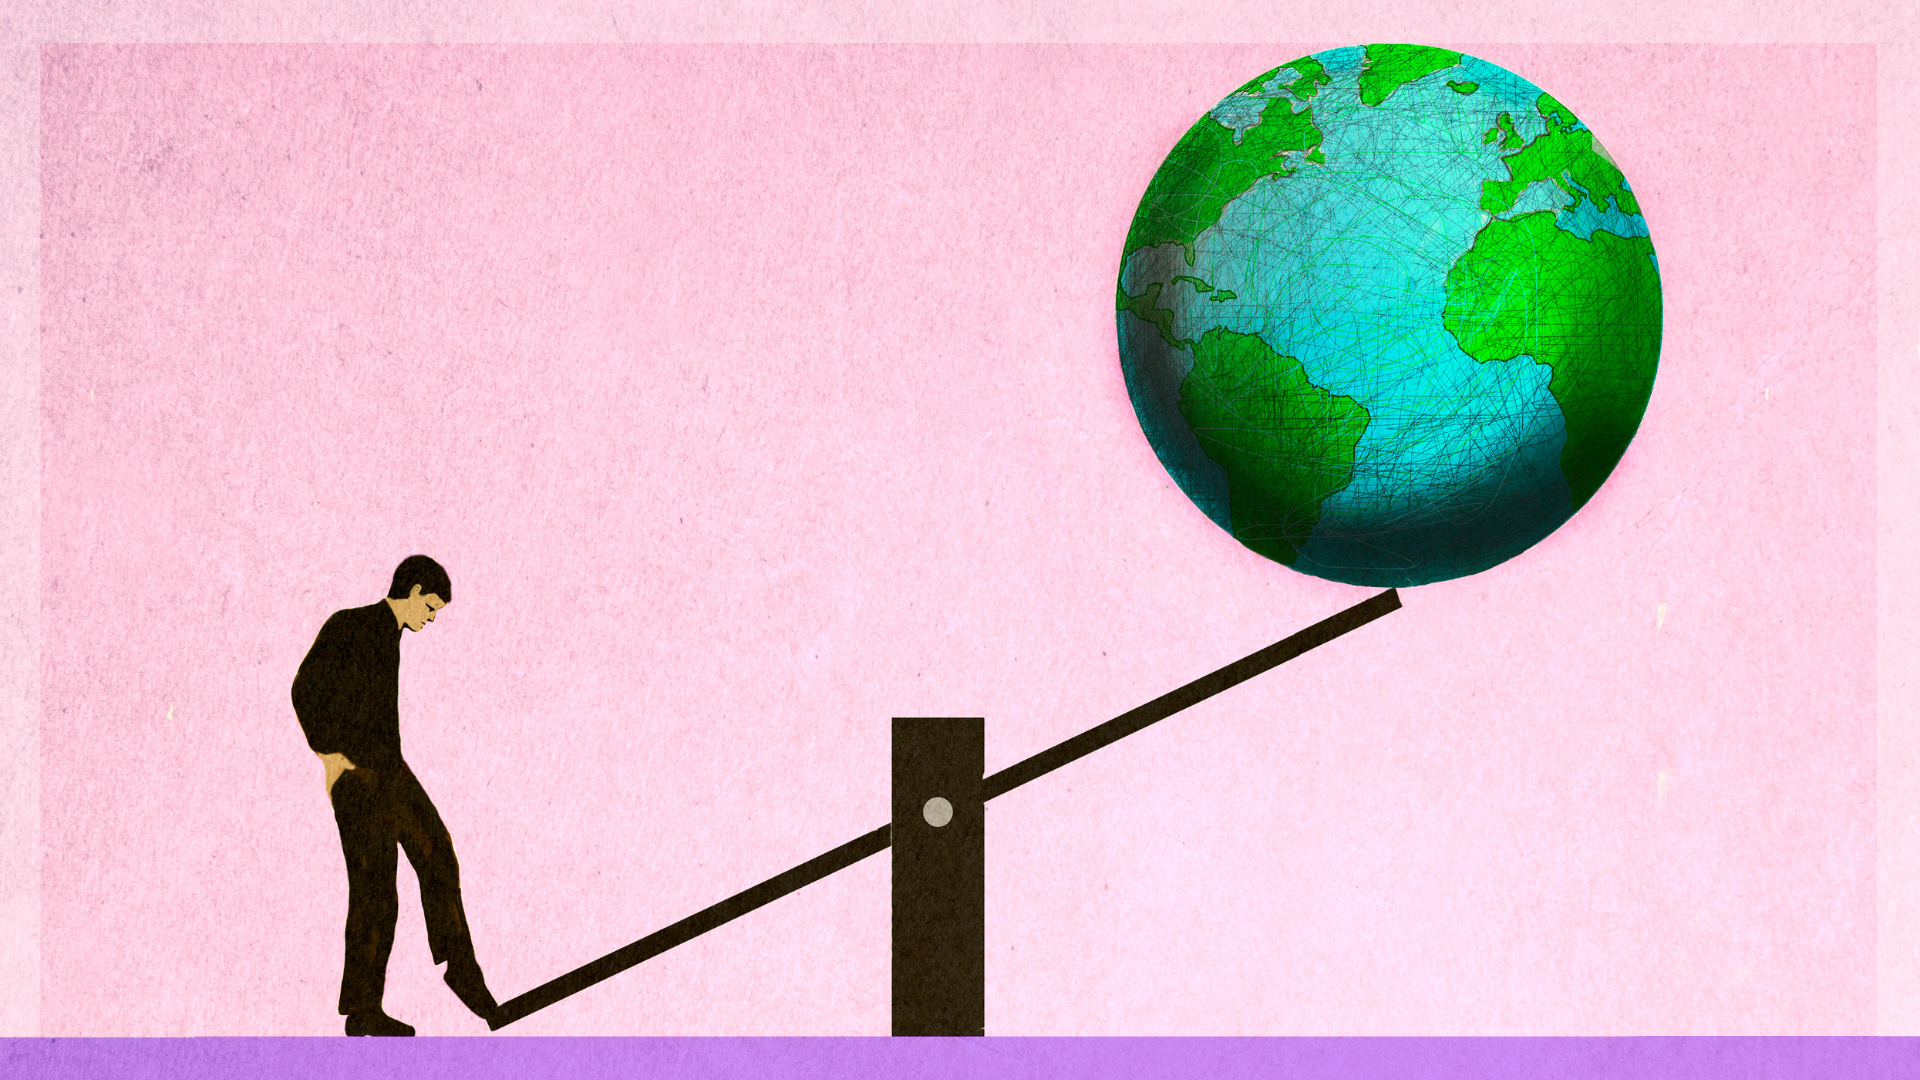 A man steps onto a seesaw. The other end of the seesaw hangs in the air and on it is a globe. Against a pink background.